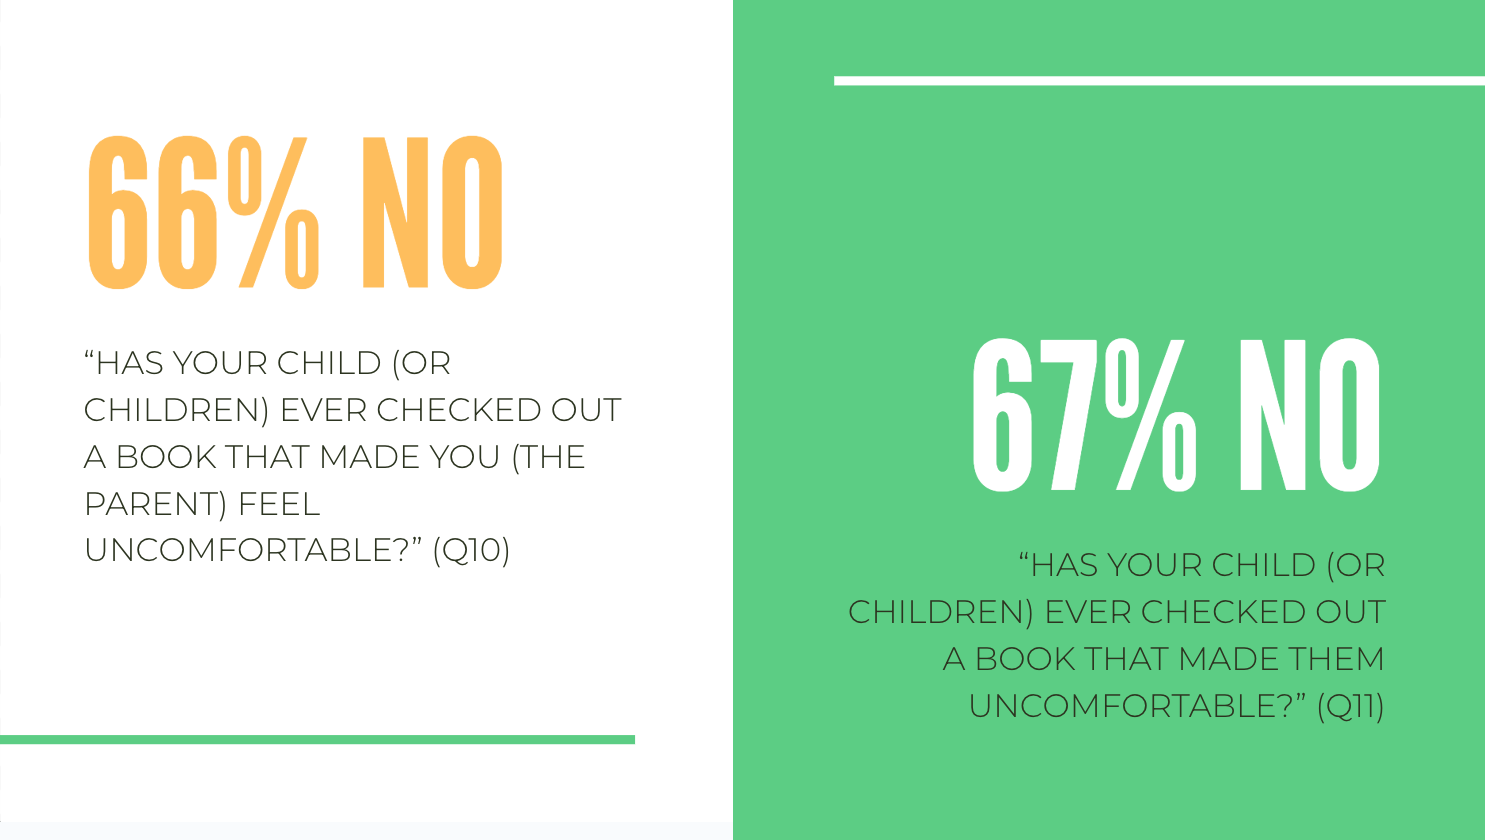 a graphic with the text Has your child ever checked out a book that made you feel uncomfortable? (66% No) and Has your child every checked out a book that made them feel uncomfortable? (67% No)